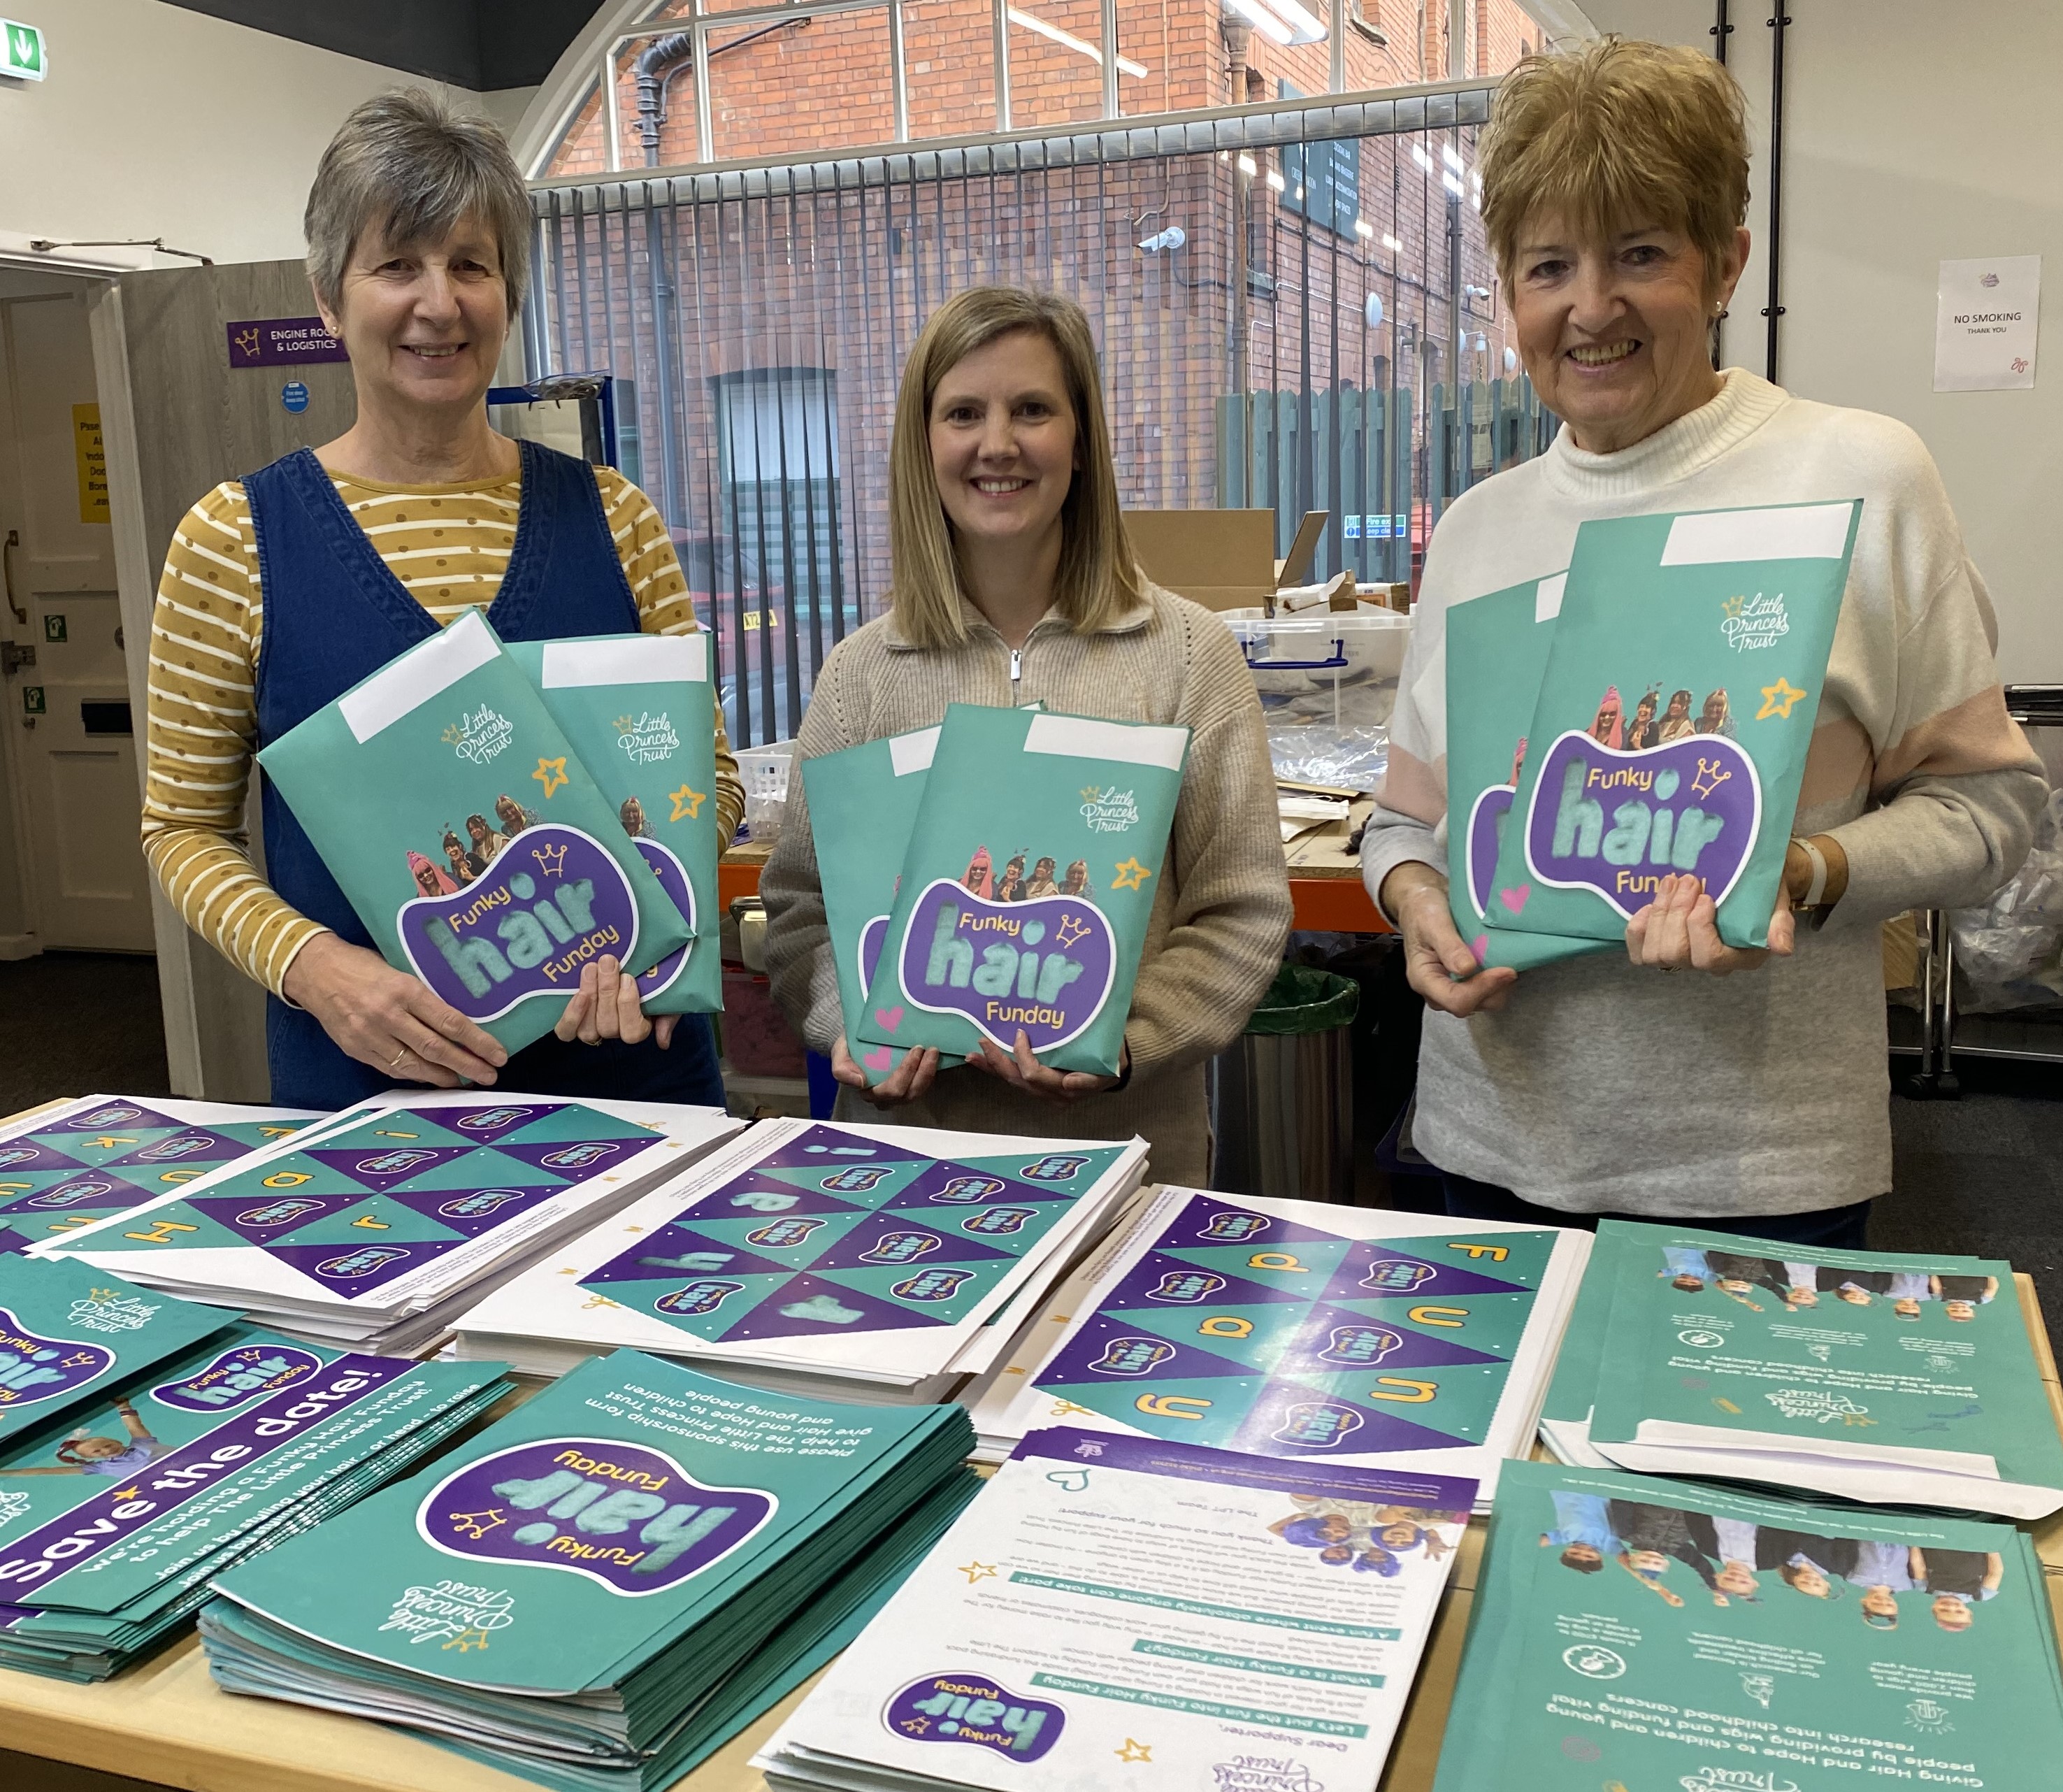 Little Princess Trust volunteers Jayne Broome (left) and Di Butler (right) have been busy with LPT Logistics Assistant Donna Clarke making up the new Funky Hair Funday fundraising packs.